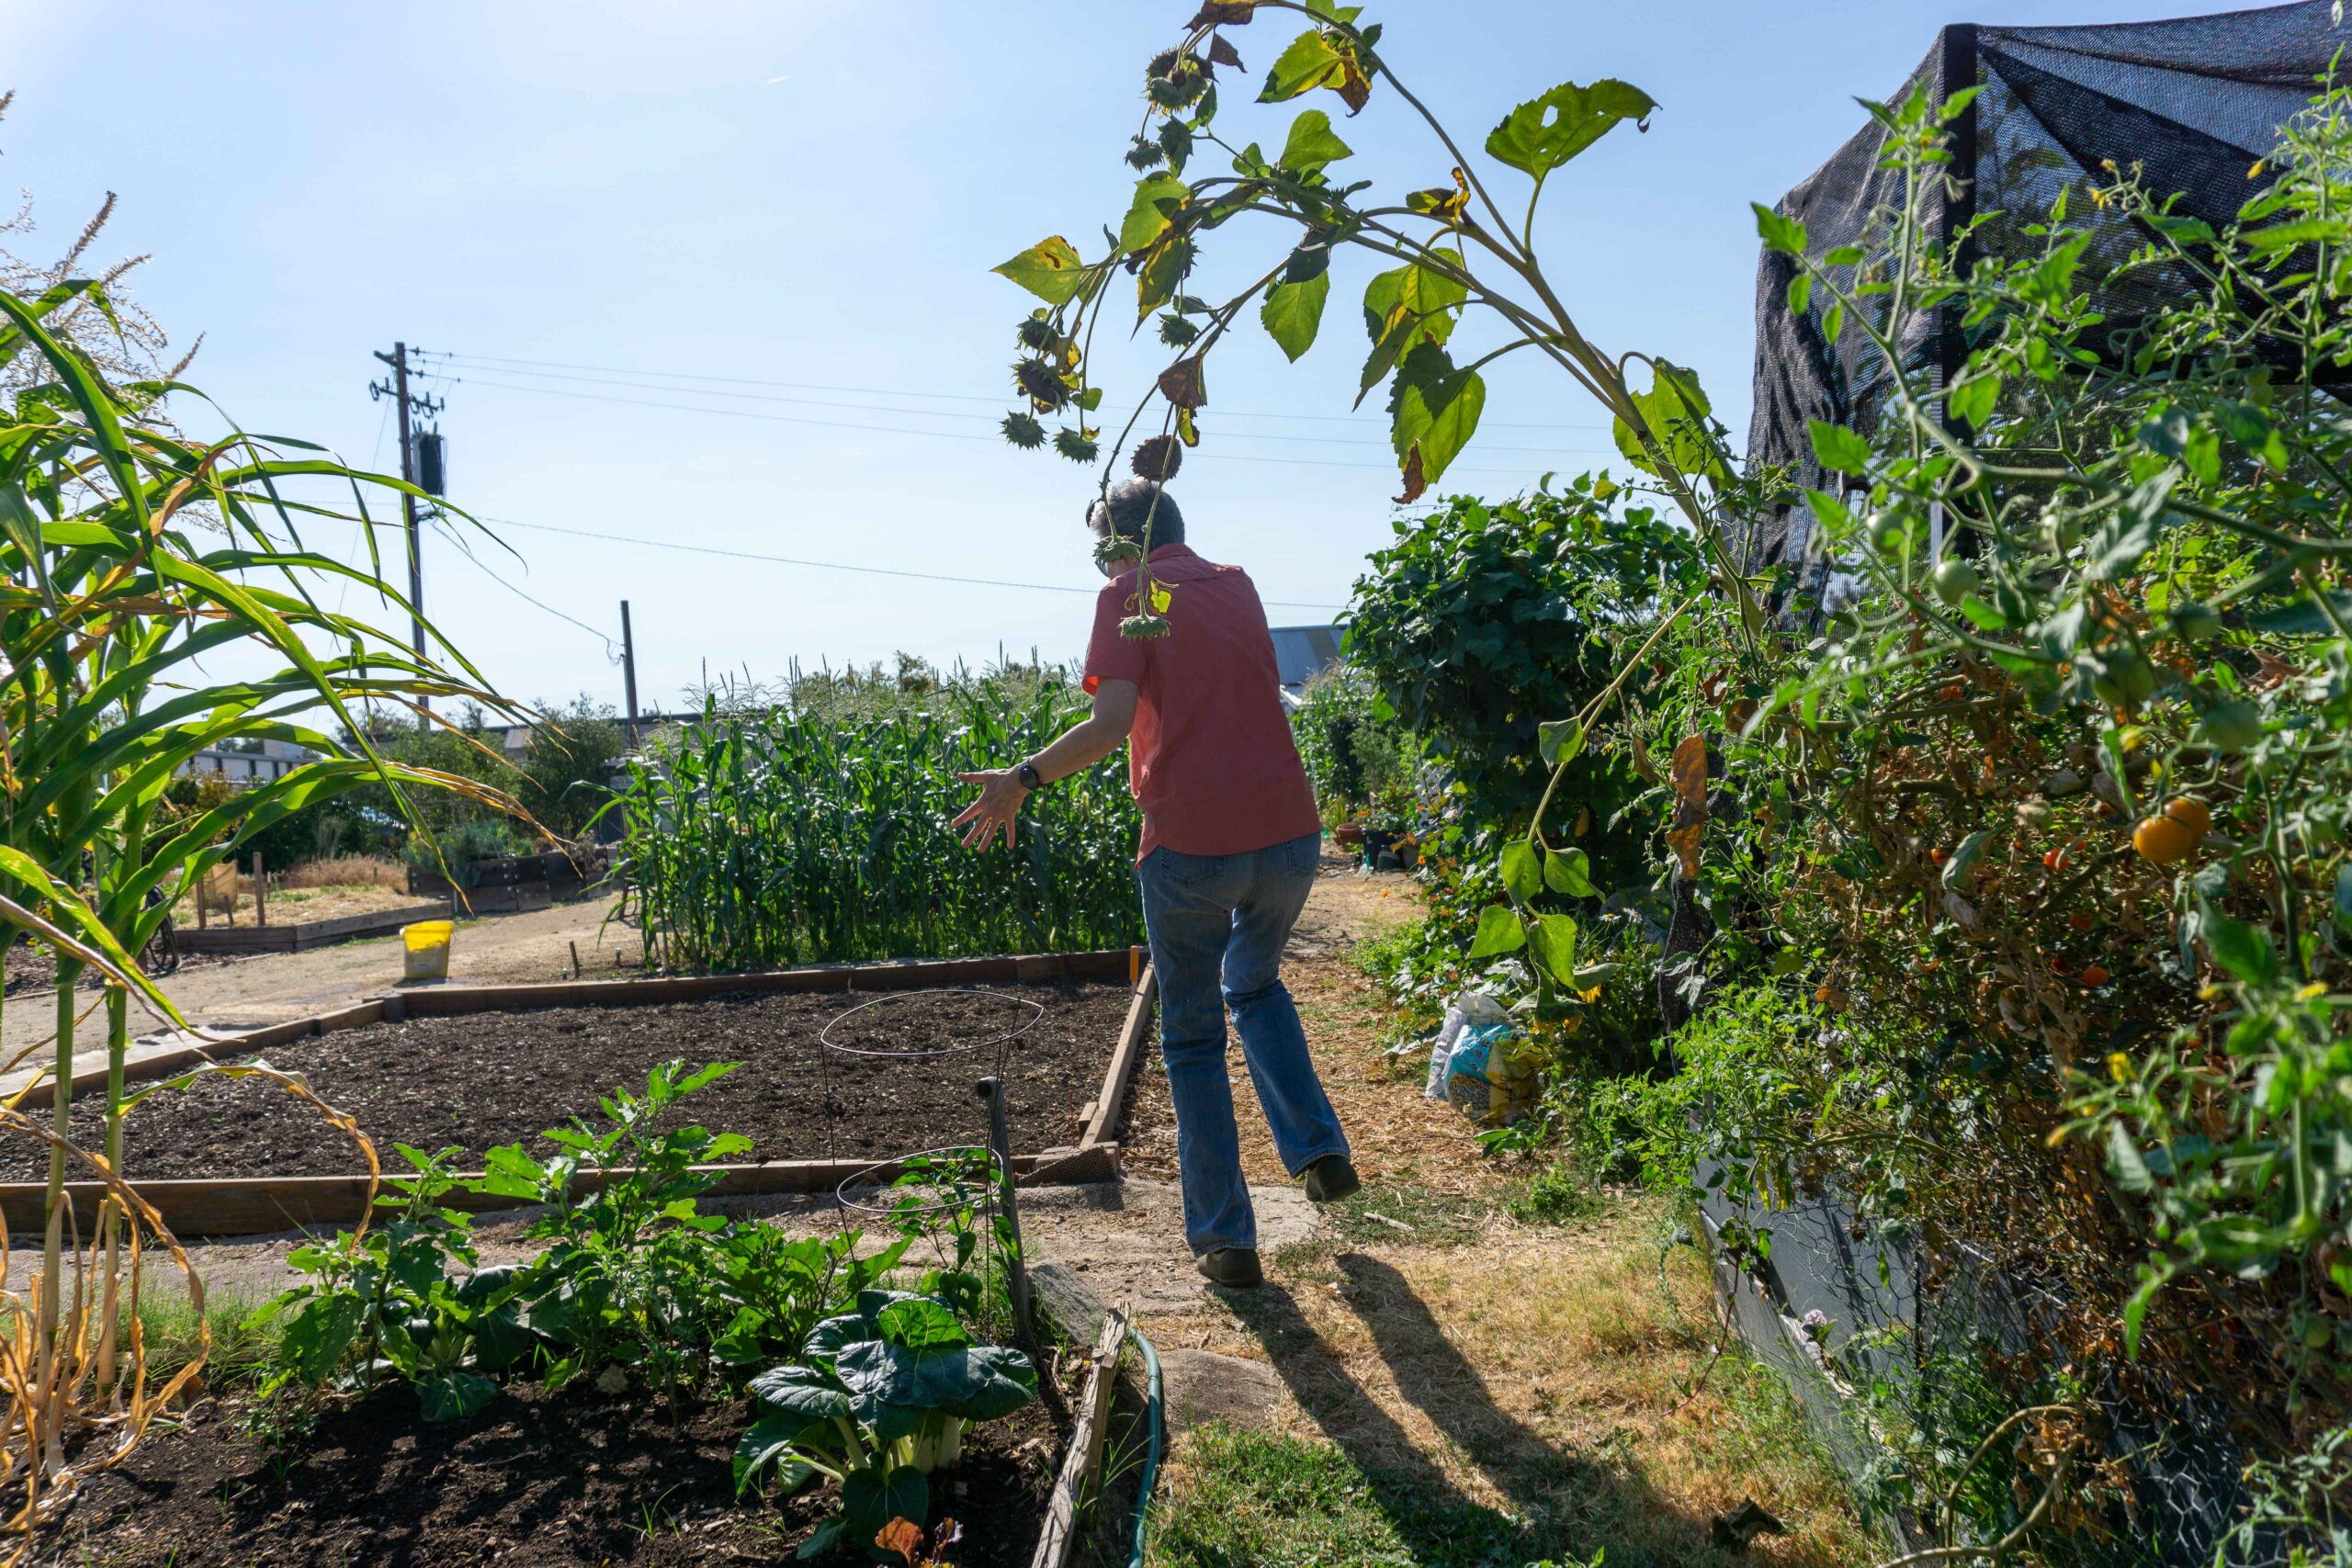 A person walking through a community garden surrounded by vegetable and corn.